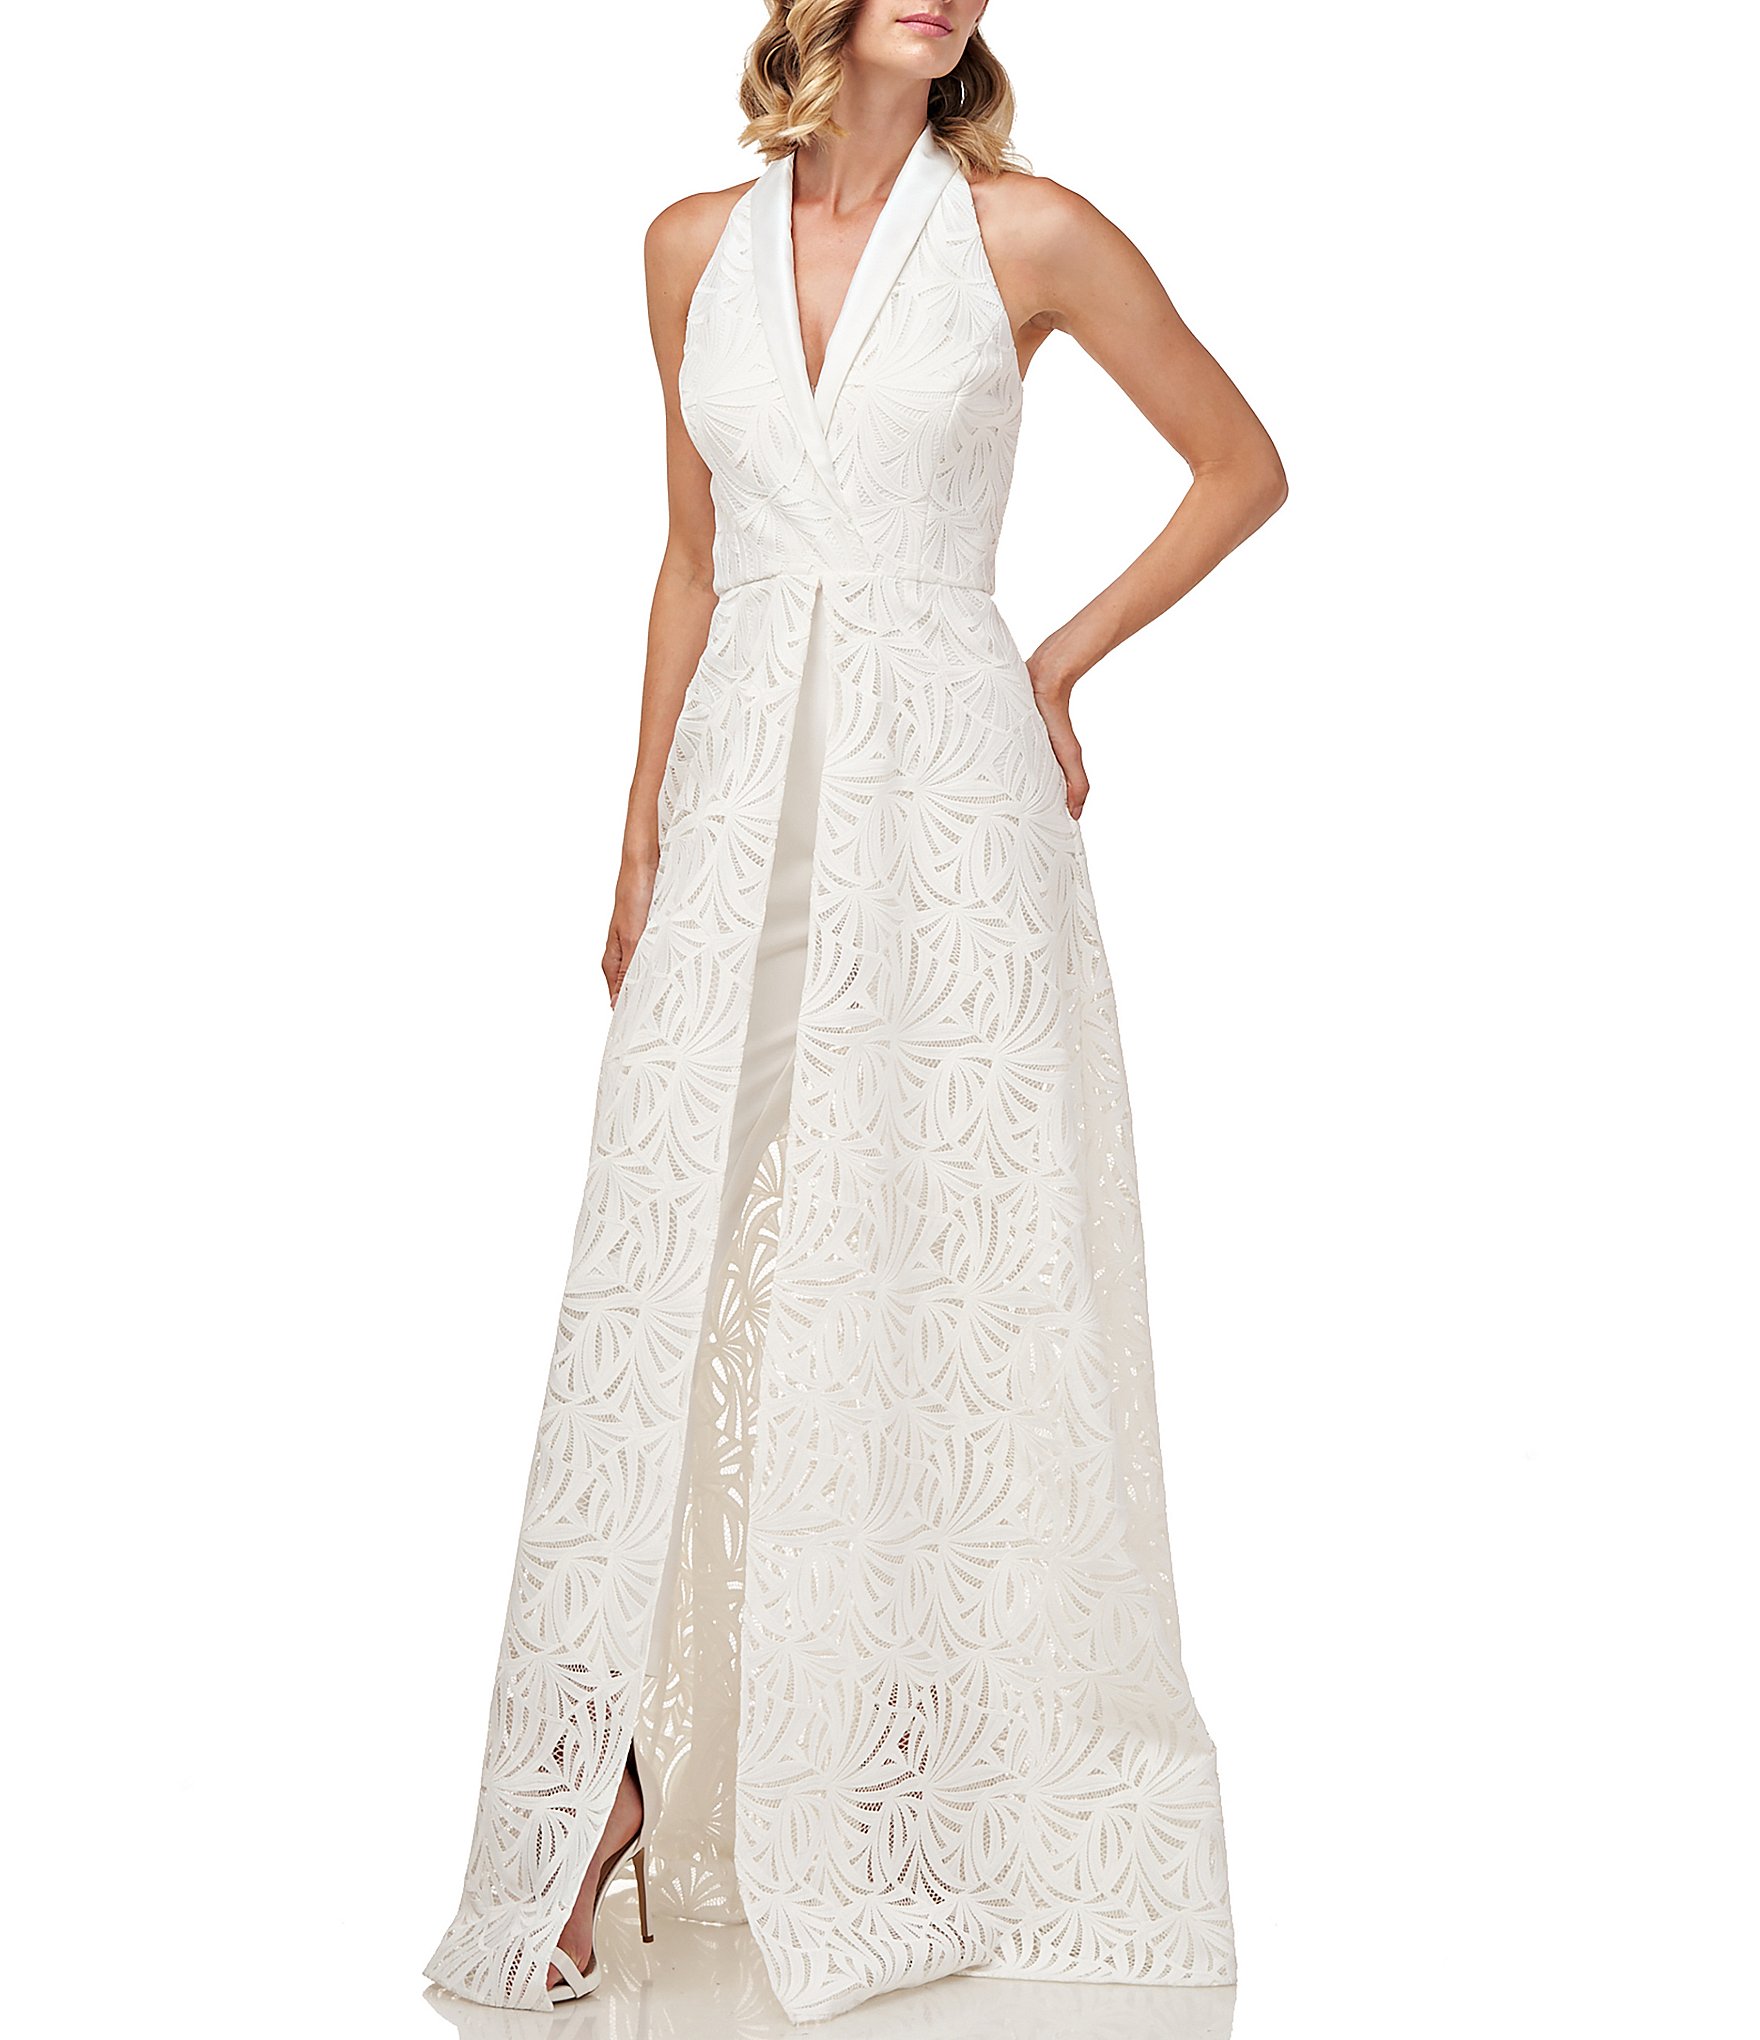 Lace skirt overlay and you know this wedding jumpsuit is the best of all worlds.